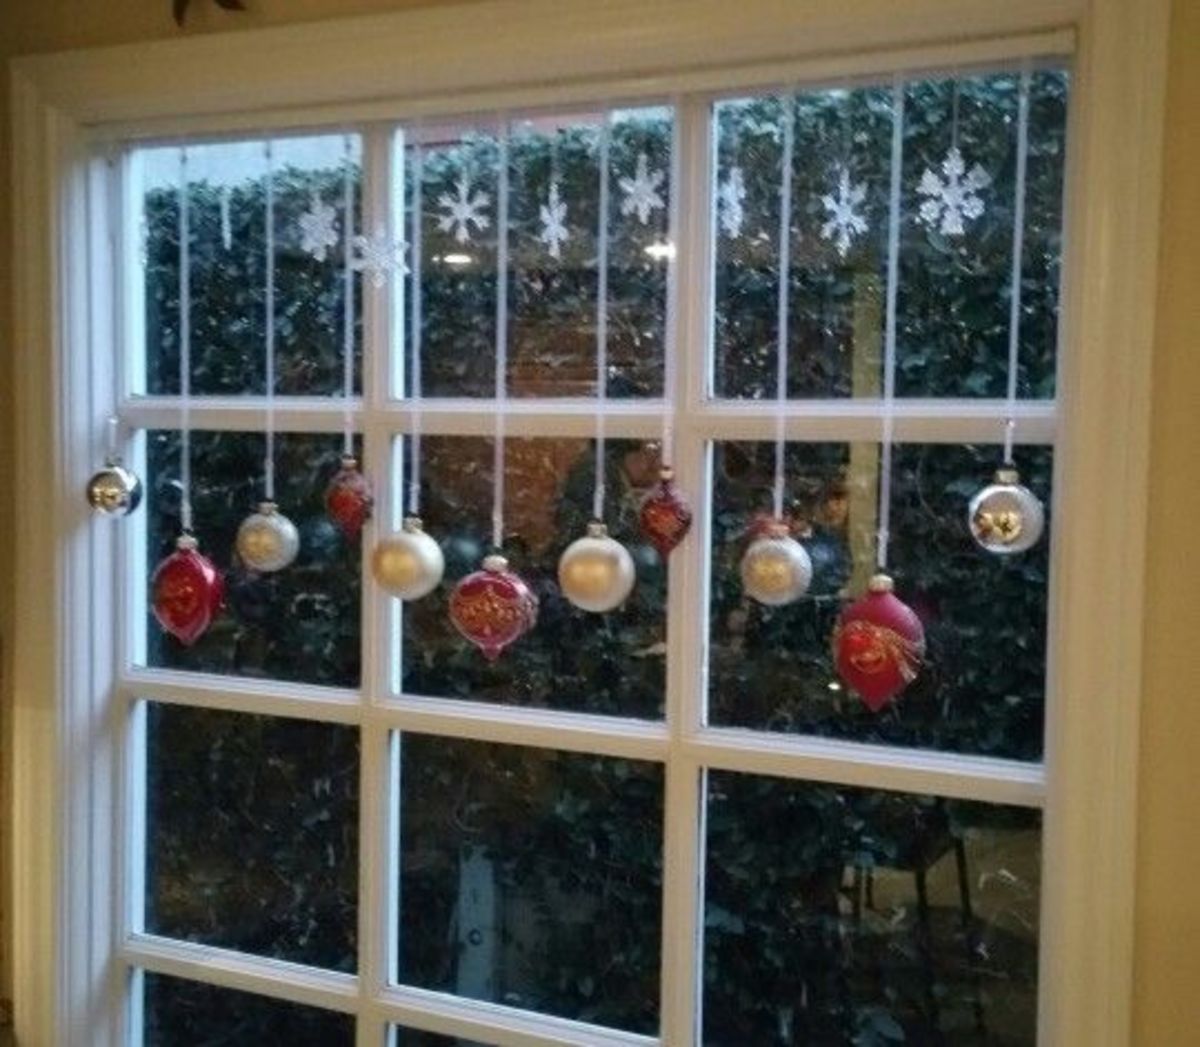 Here's another way to dangle ornaments in your window. Make sure to vary the length of the ribbons!